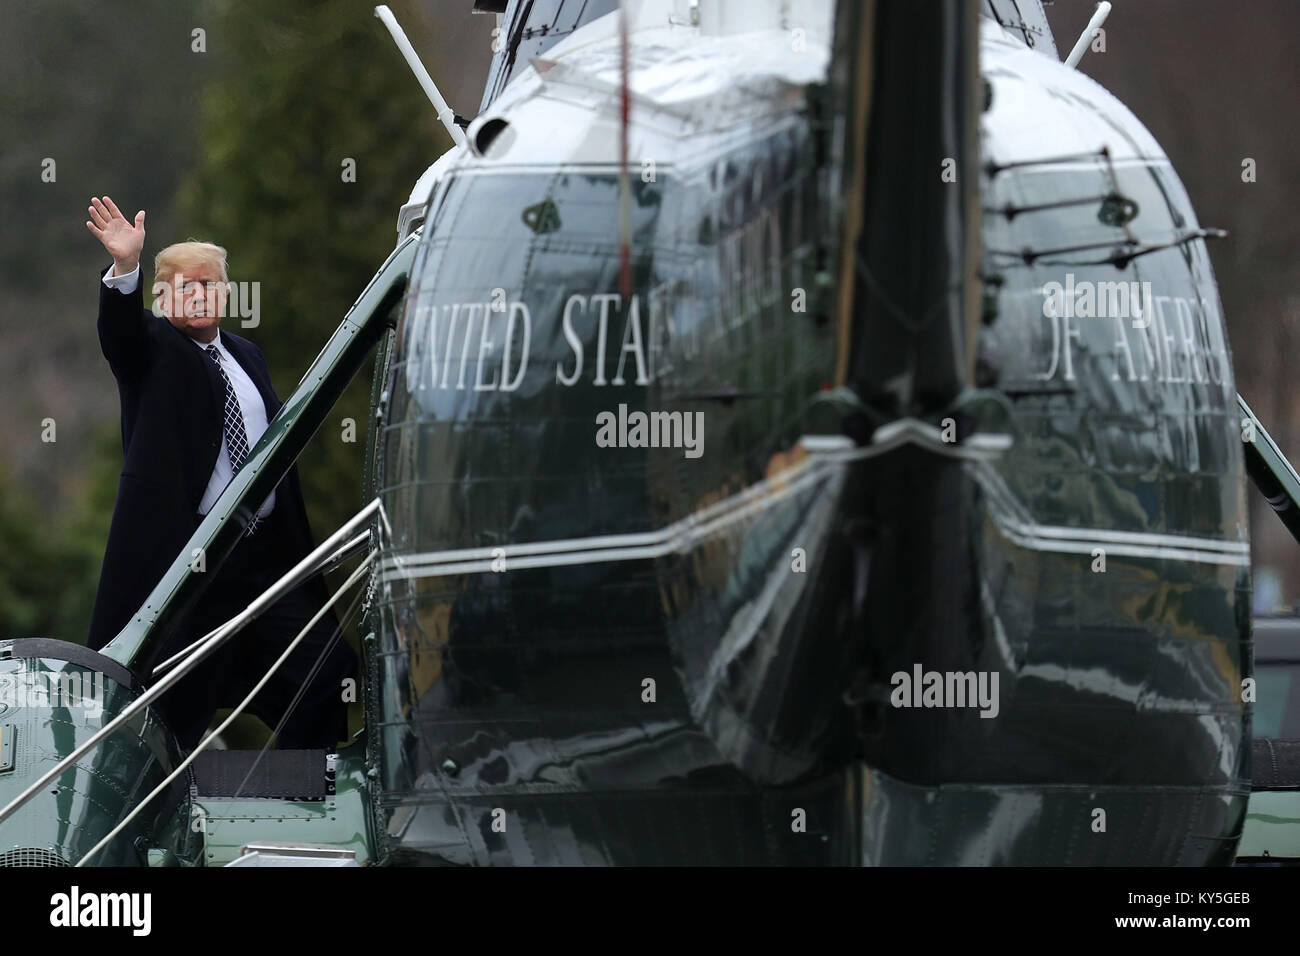 United States President Donald J. Trump waves to journalists as he boards Marine One on departure from Walter Reed National Military Medical Center following his annual physical examination January 12, 2018 in Bethesda, Maryland. Trump will next travel to Florida to spend the Dr. Martin Luther King Jr. Day holiday weekend at his Mar-a-Lago resort. Credit: Chip Somodevilla/Pool via CNP /MediaPunch Stock Photo